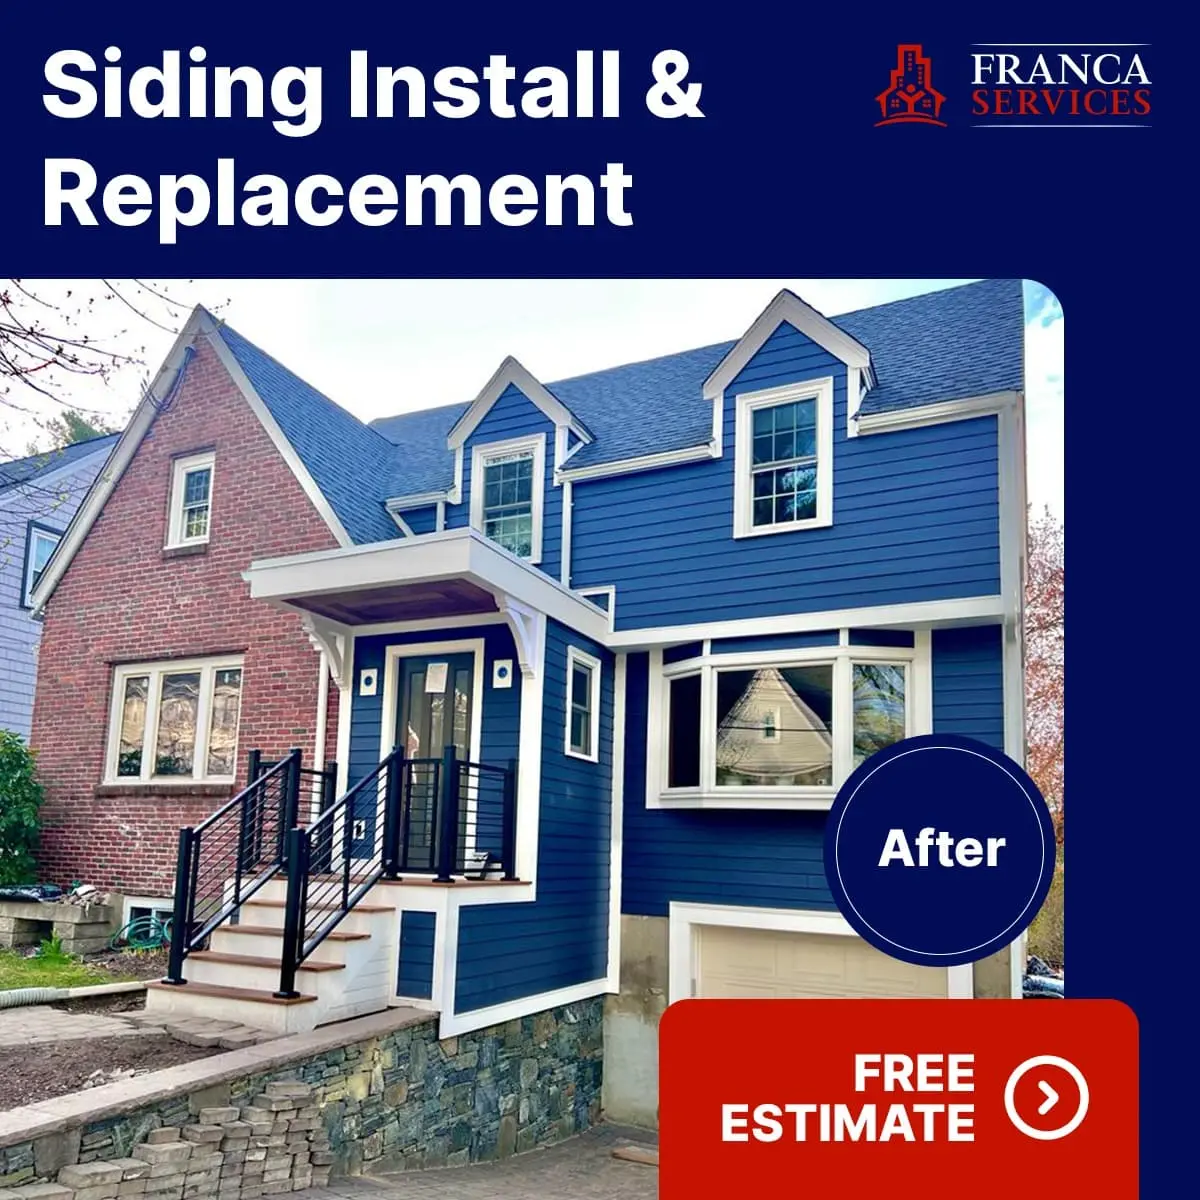 siding replacement service after in Framingham